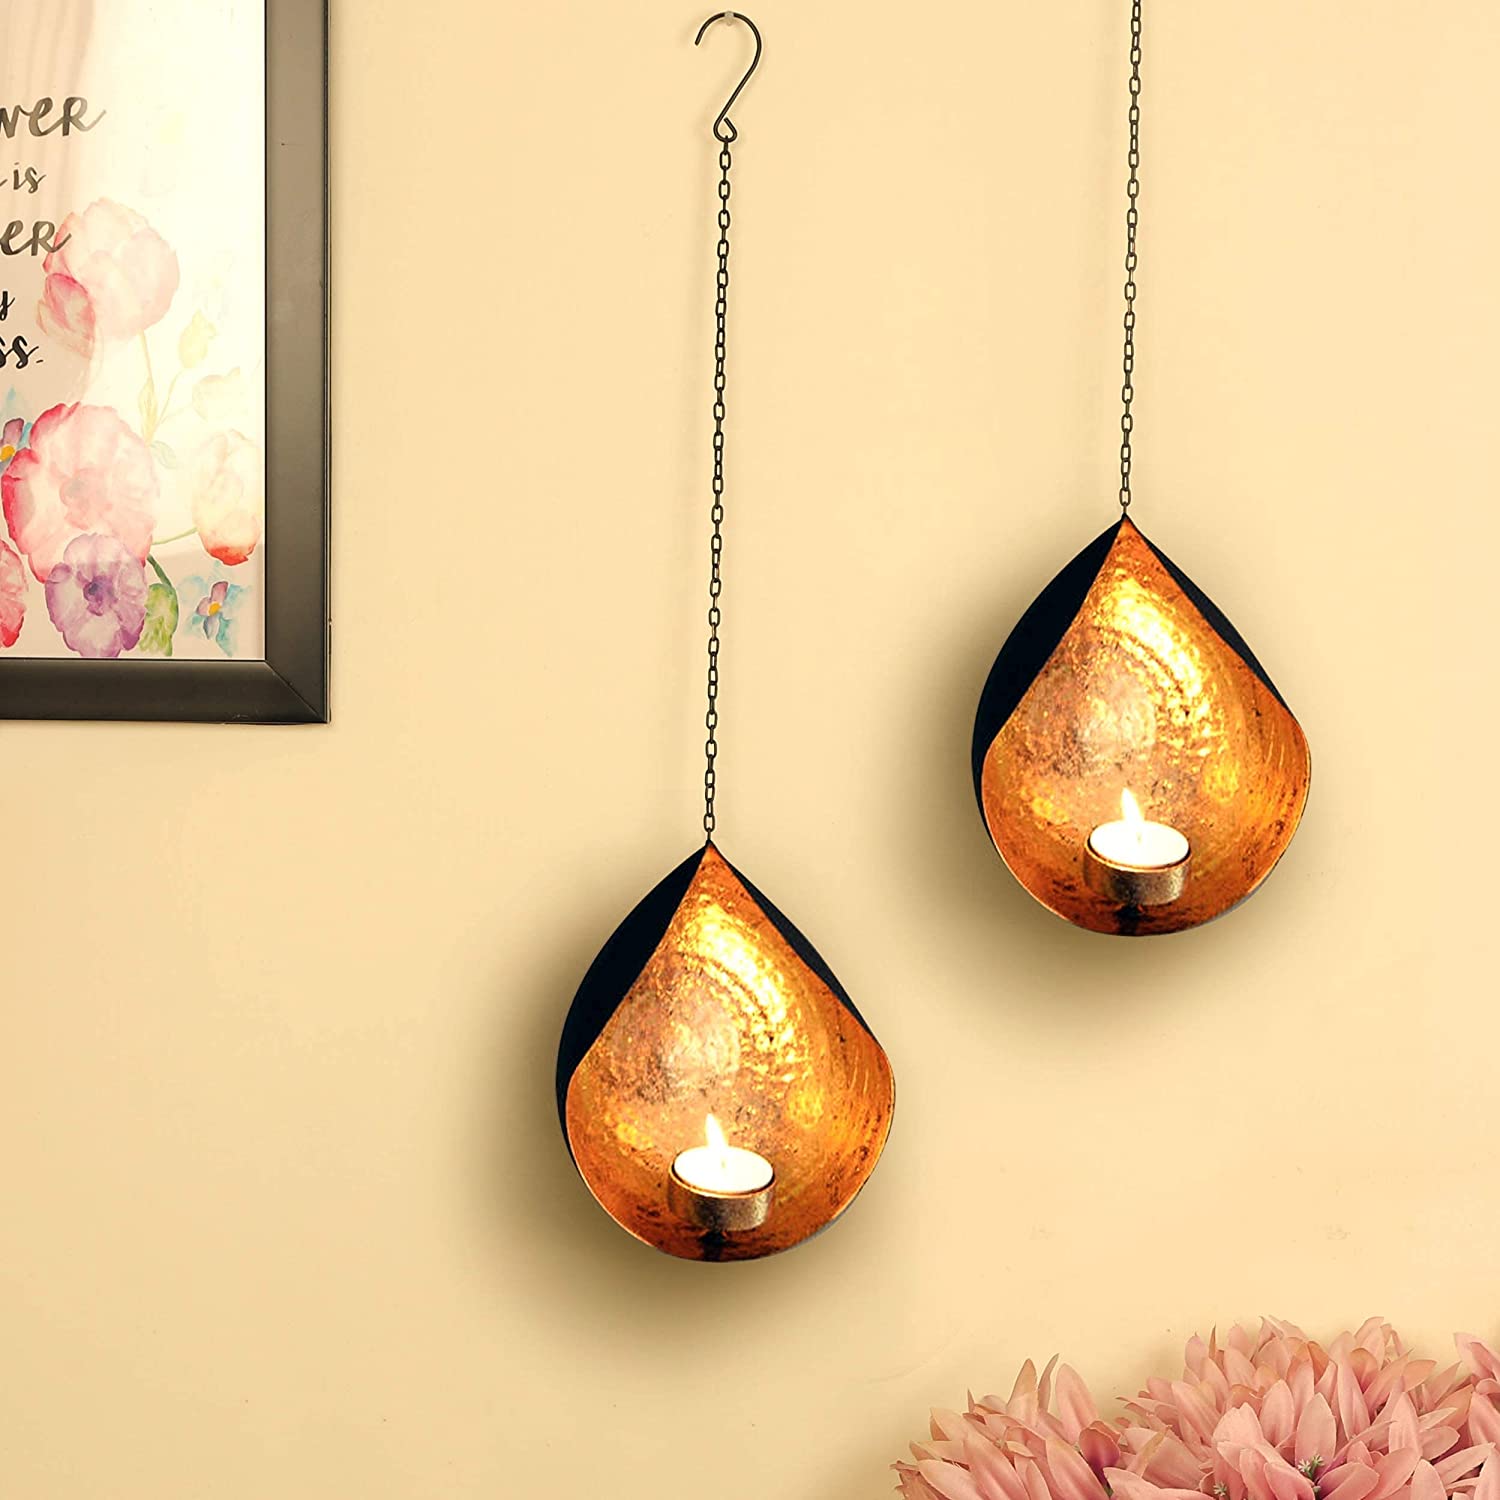 Wall Hanging Tealight Candle Holders for Home Decoration - Wall Sconces with Tealight Candles Home Décor Item (Pack of 2)